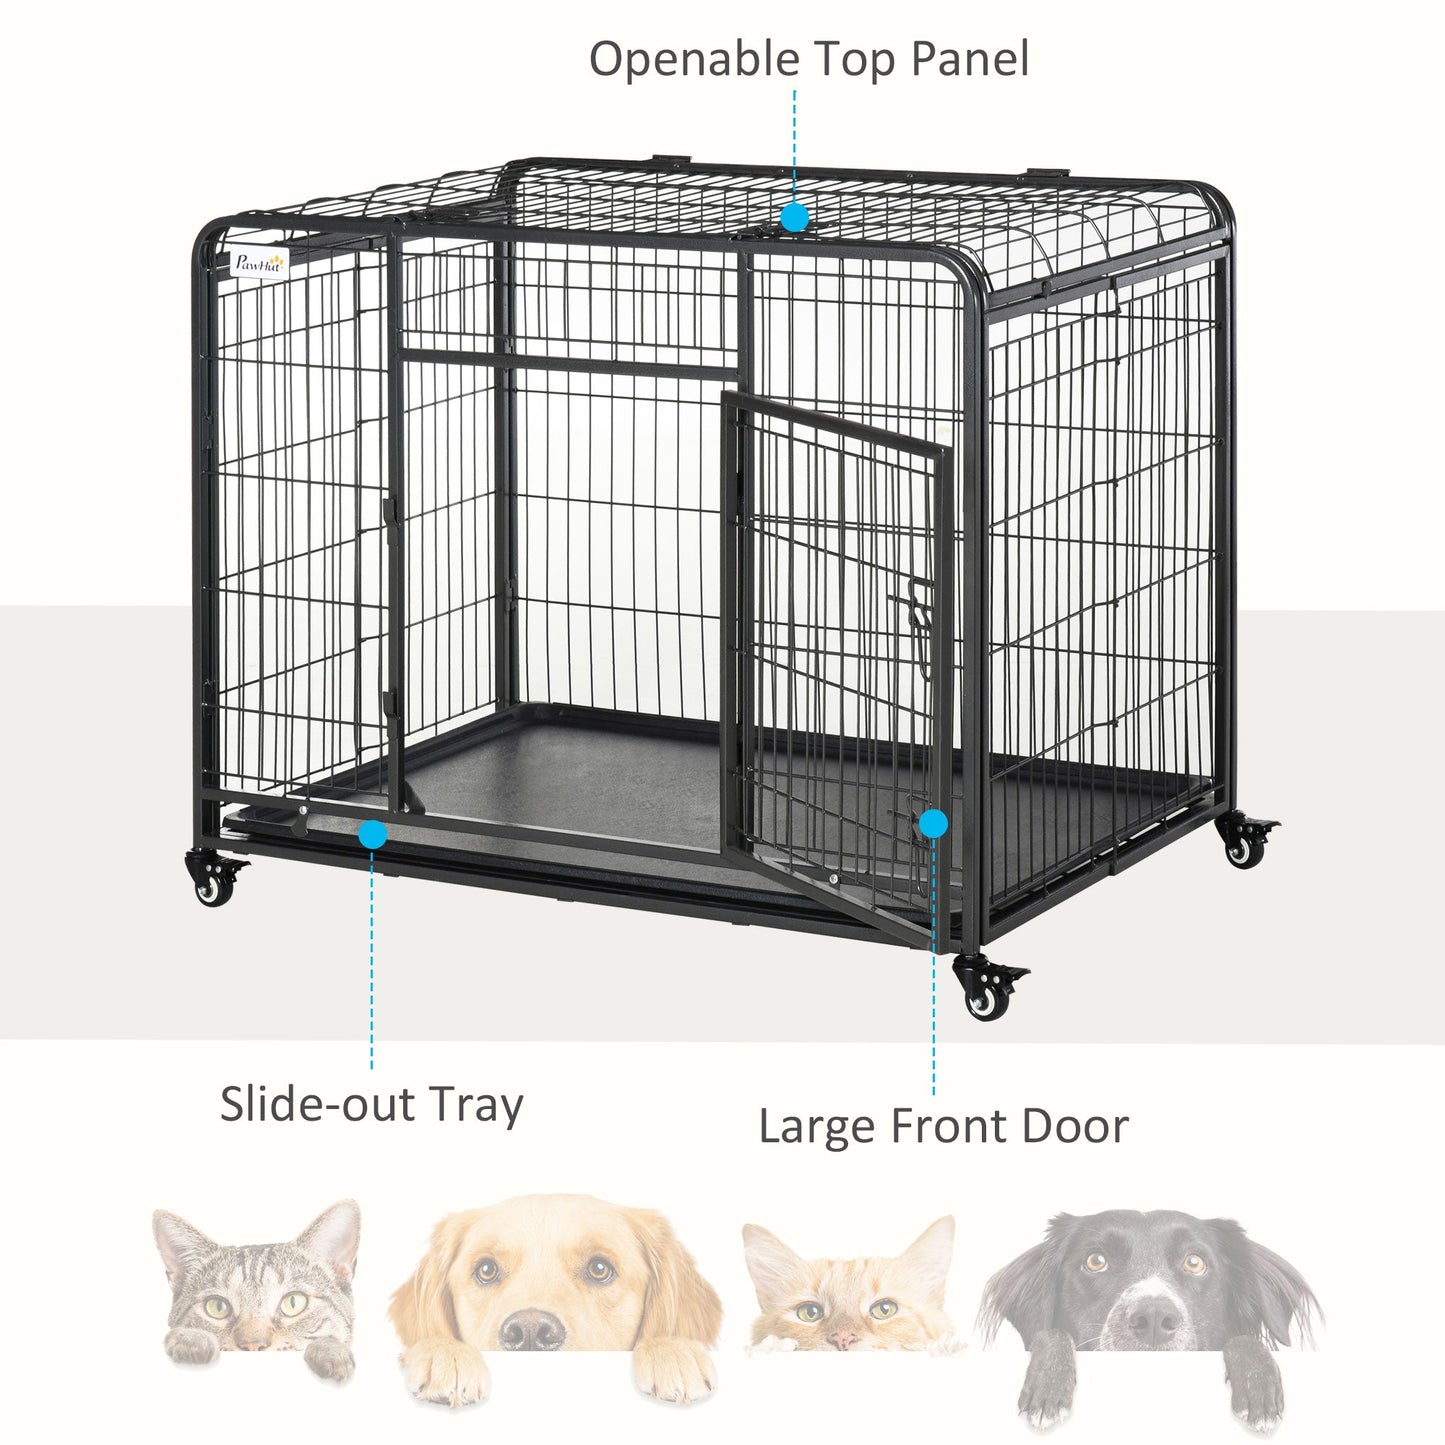 Outdoor and Garden-Heavy Duty Metal Dog Crate, Folding Pet Cage & Kennel with Removable Tray & 4 Wheels for Indoor Outdoor Use, Gray - Outdoor Style Company